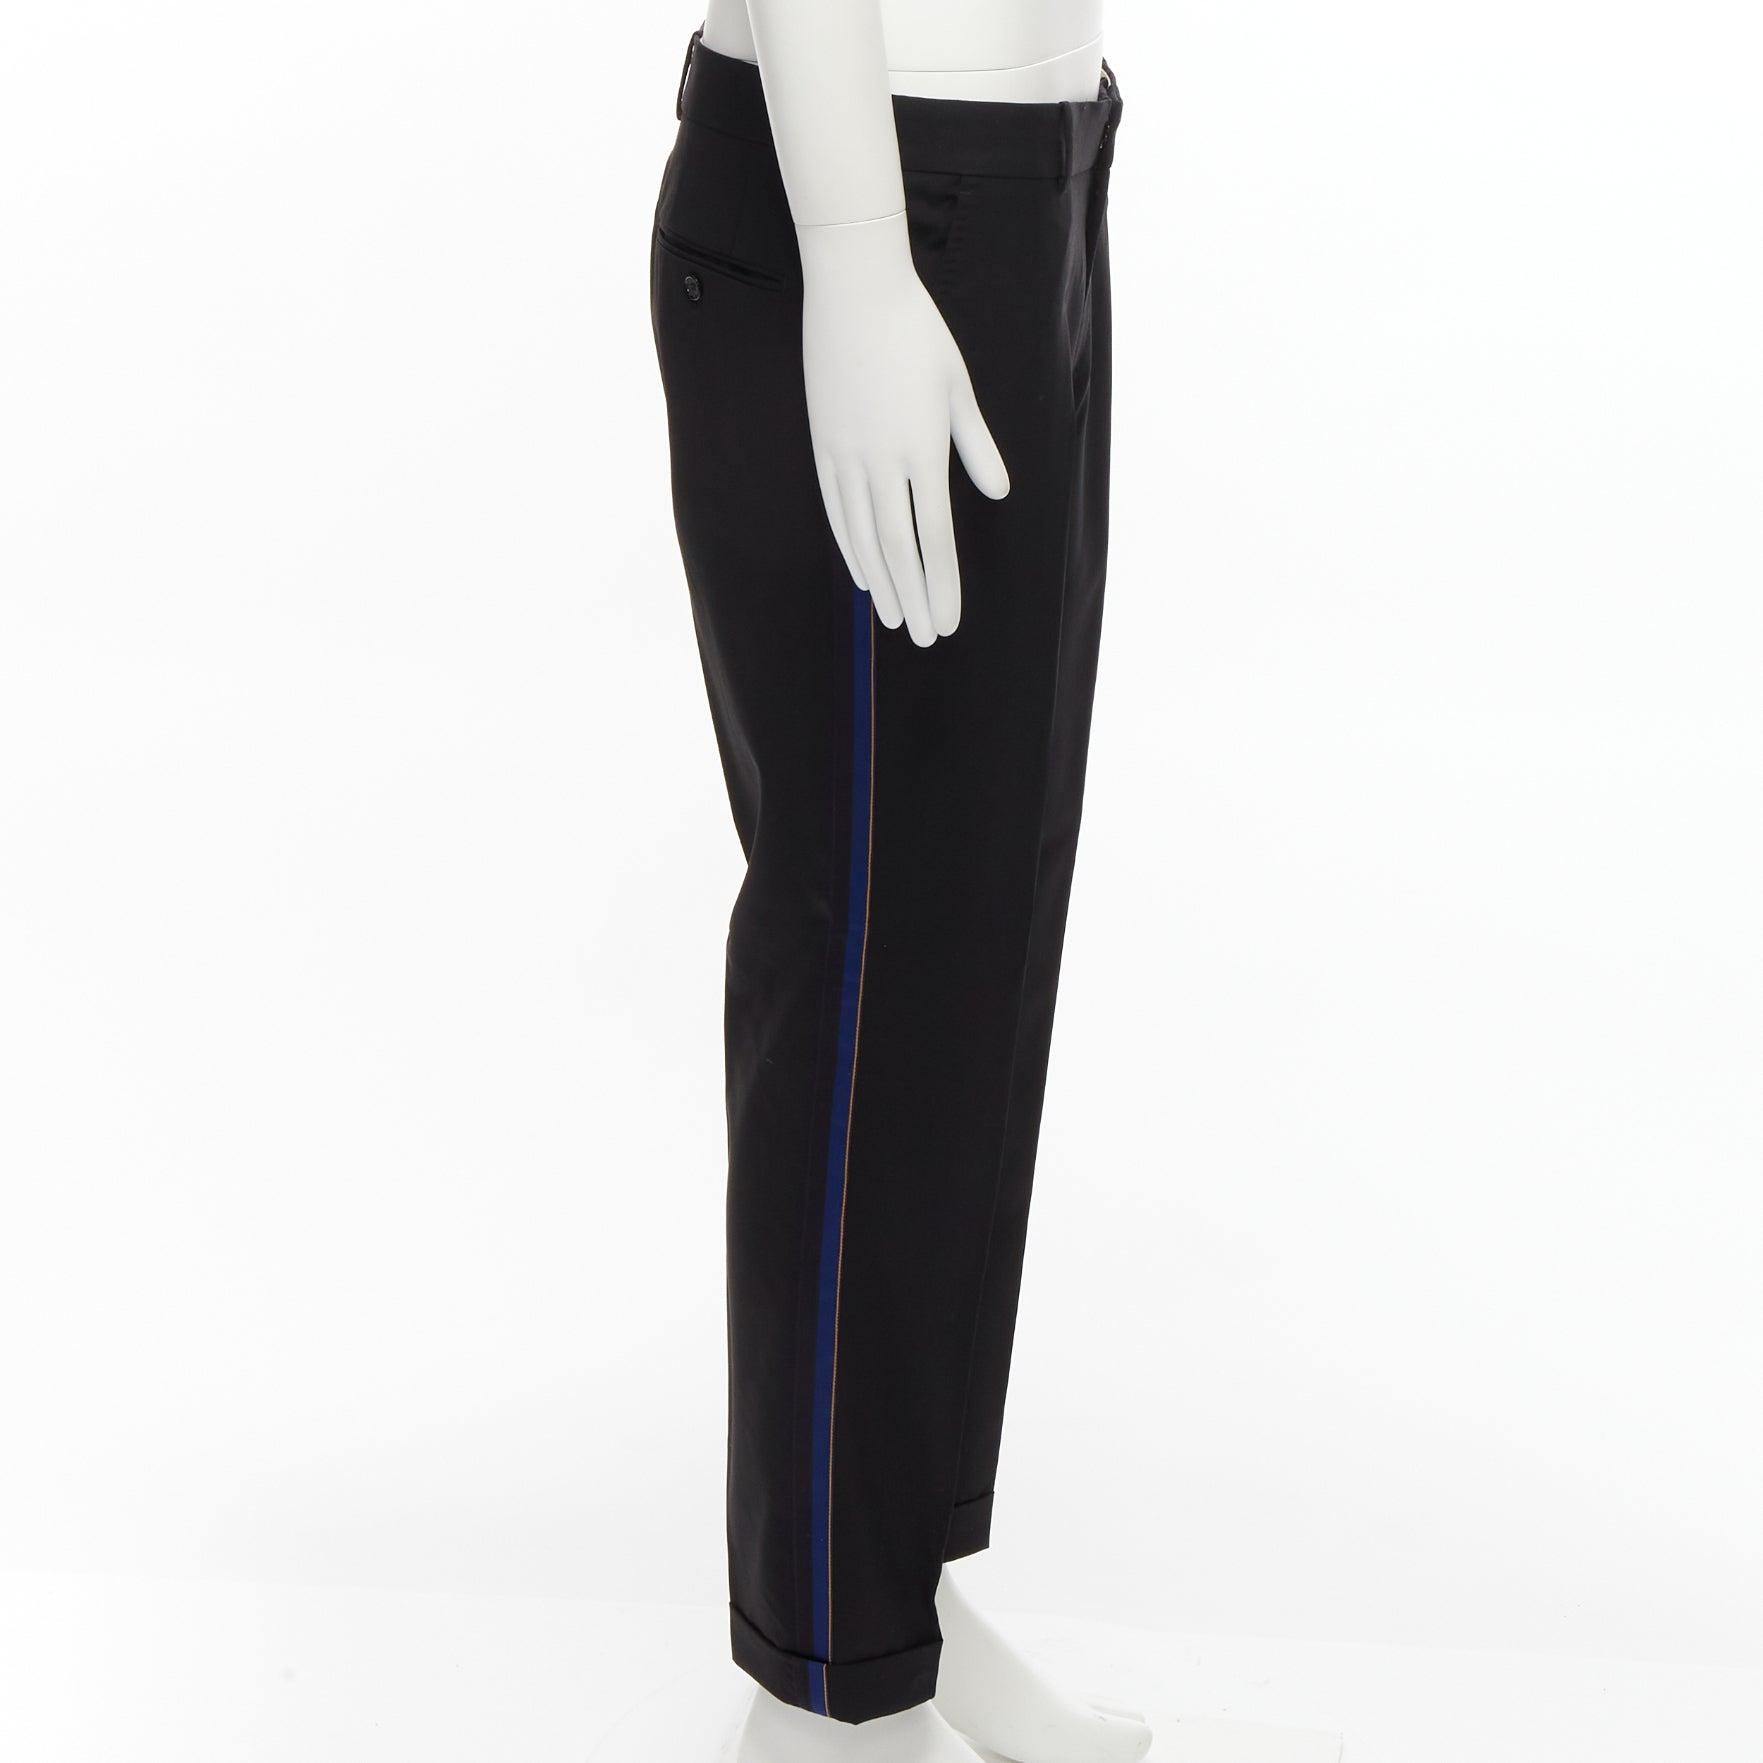 ALEXANDER MCQUEEN 2016 black wool blue trim yellow trousers pants IT48 M
Reference: JSLE/A00028
Brand: Alexander McQueen
Collection: 2016
Material: Wool
Color: Black, Blue
Pattern: Solid
Closure: Zip Fly
Extra Details: Side blue trim with yellow